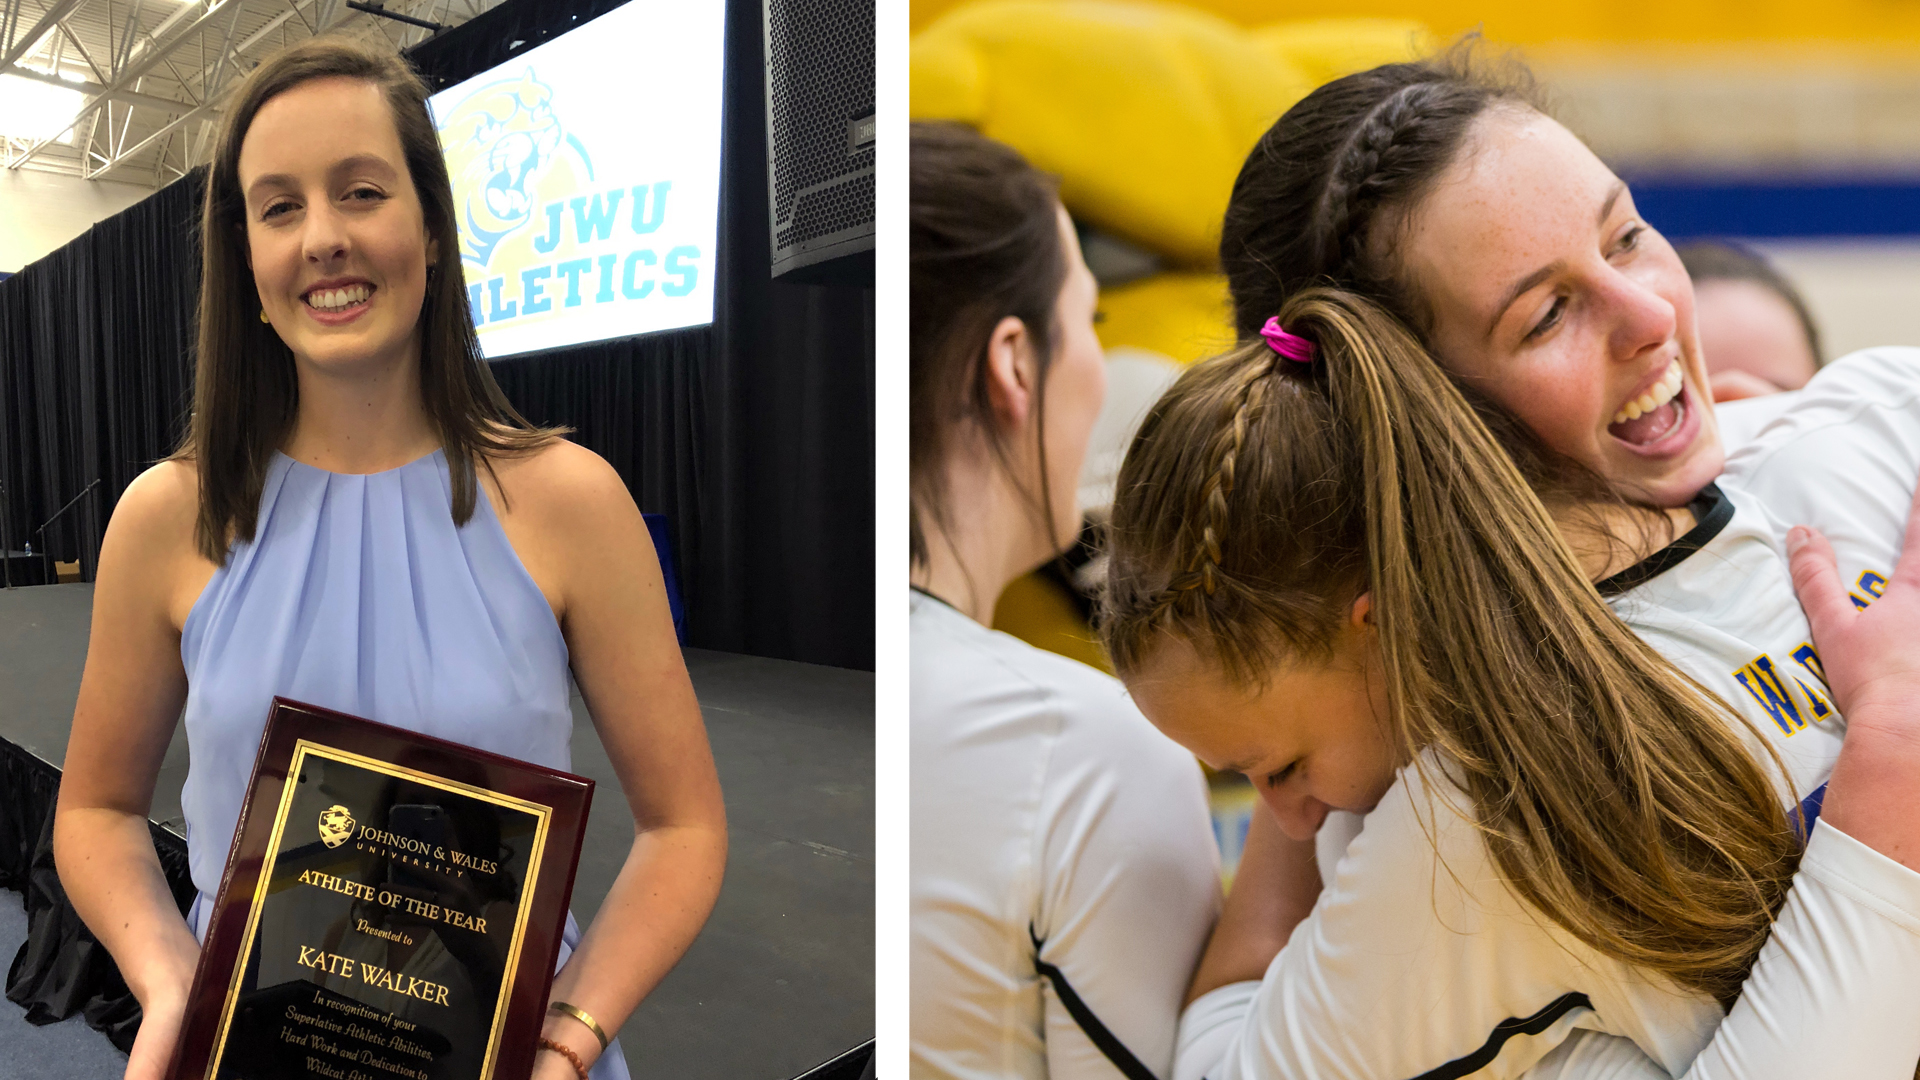 Kate Walker Athlete of the Year award and hugging a friend.